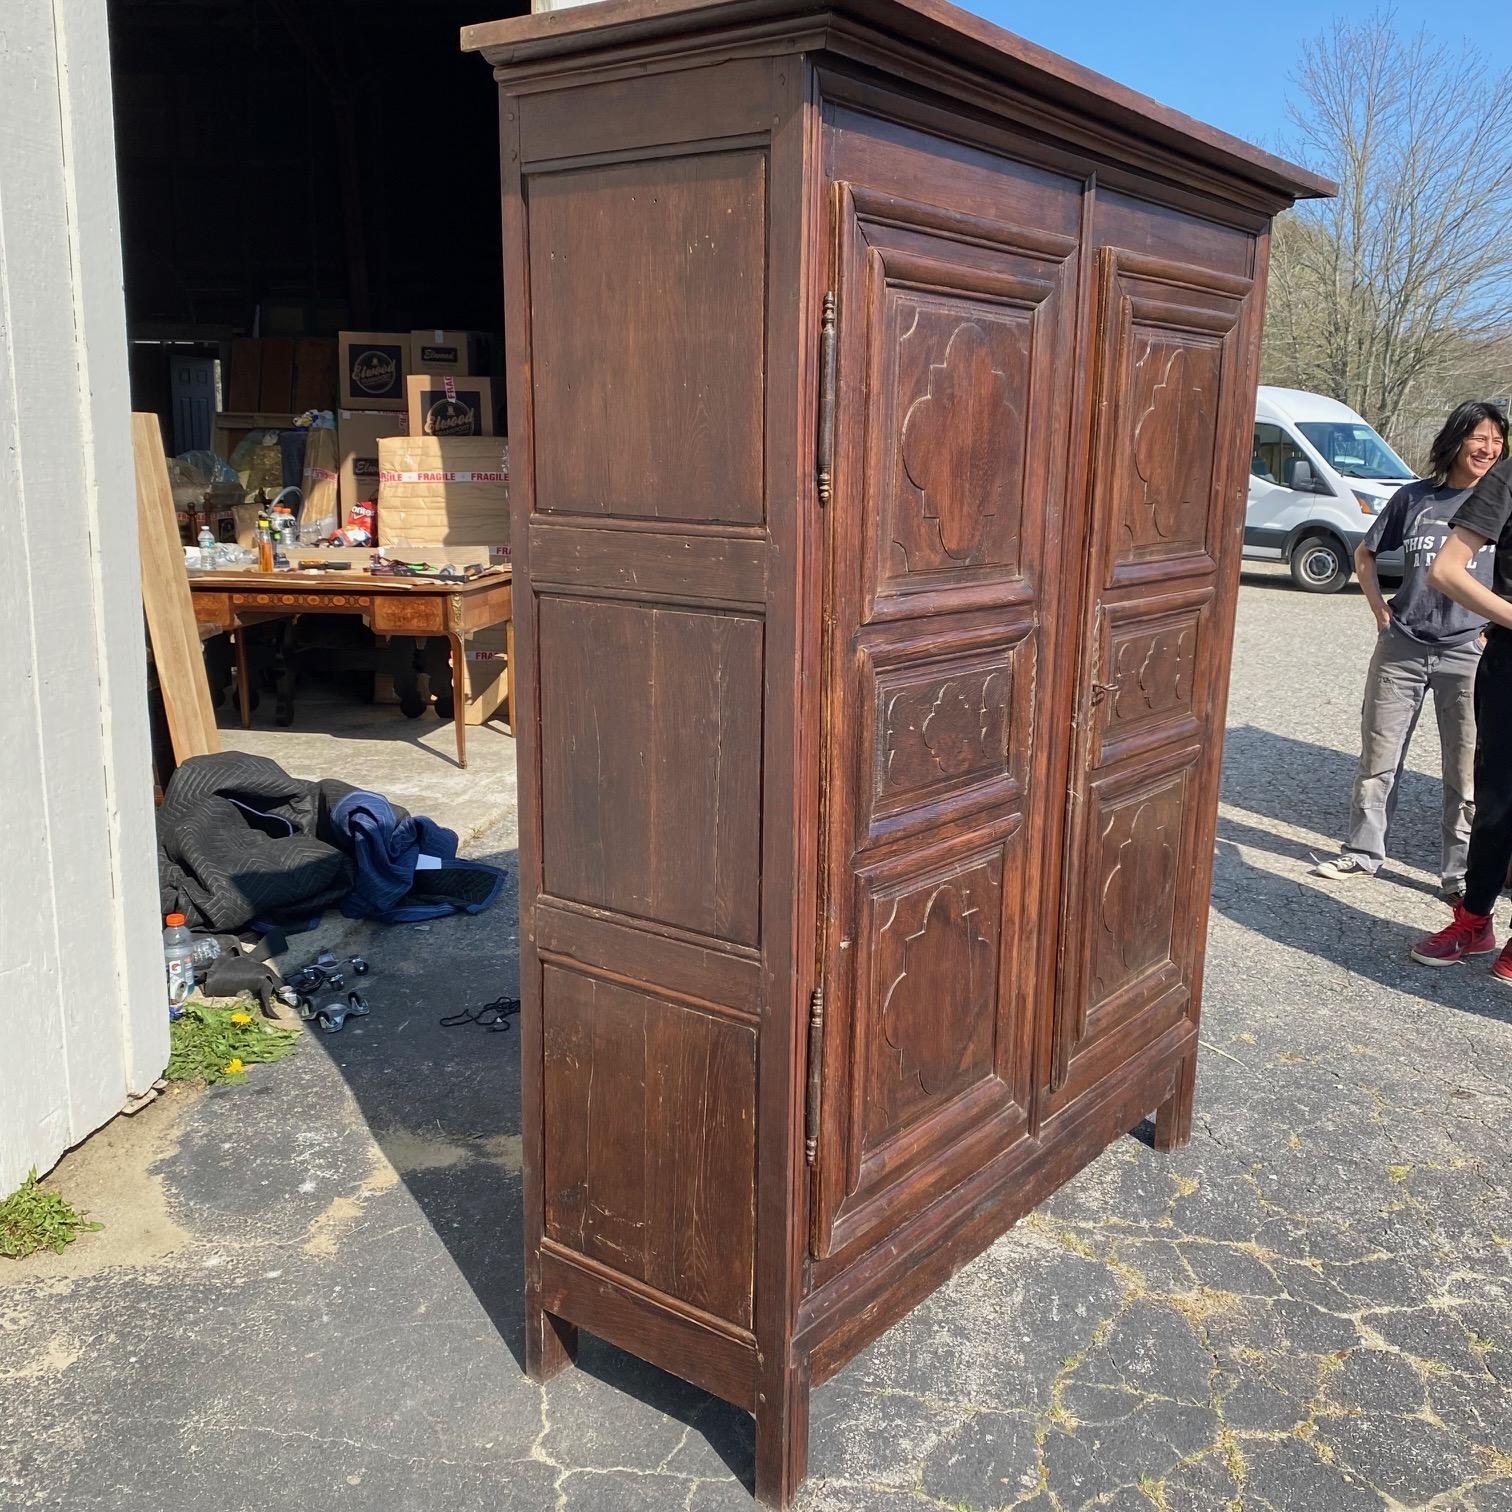 Really lovely carvings on this early 19th century oak armoire found in Normandy, France. Includes original key, and interior has three sections and two spacious drawers. Beautiful original brass escutcheons. Great patina and size!
#5952

